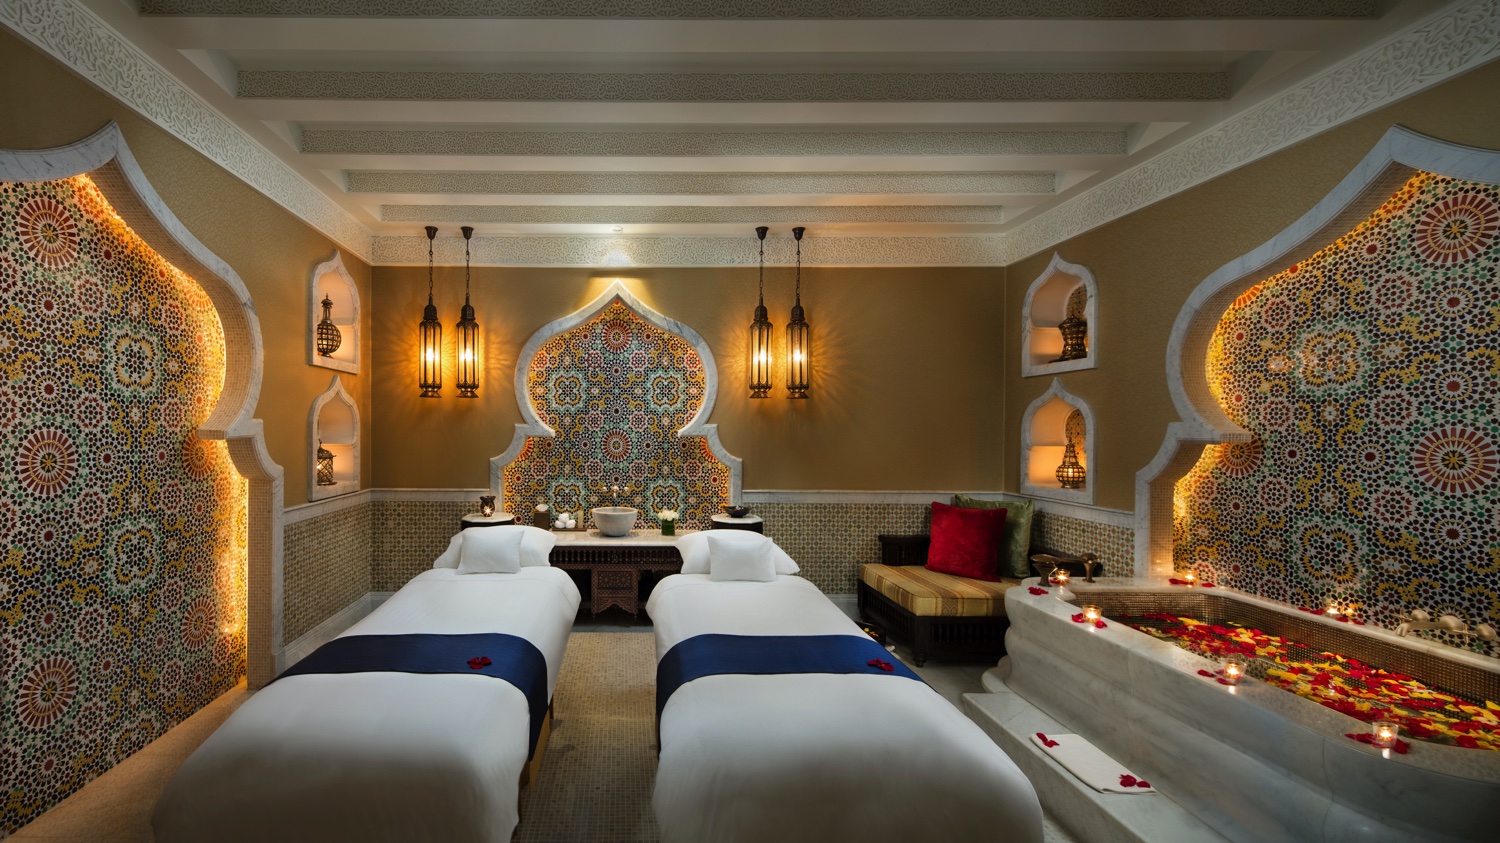 Emirates Palace Spa The Hideaway Paarbehandlungsraum 